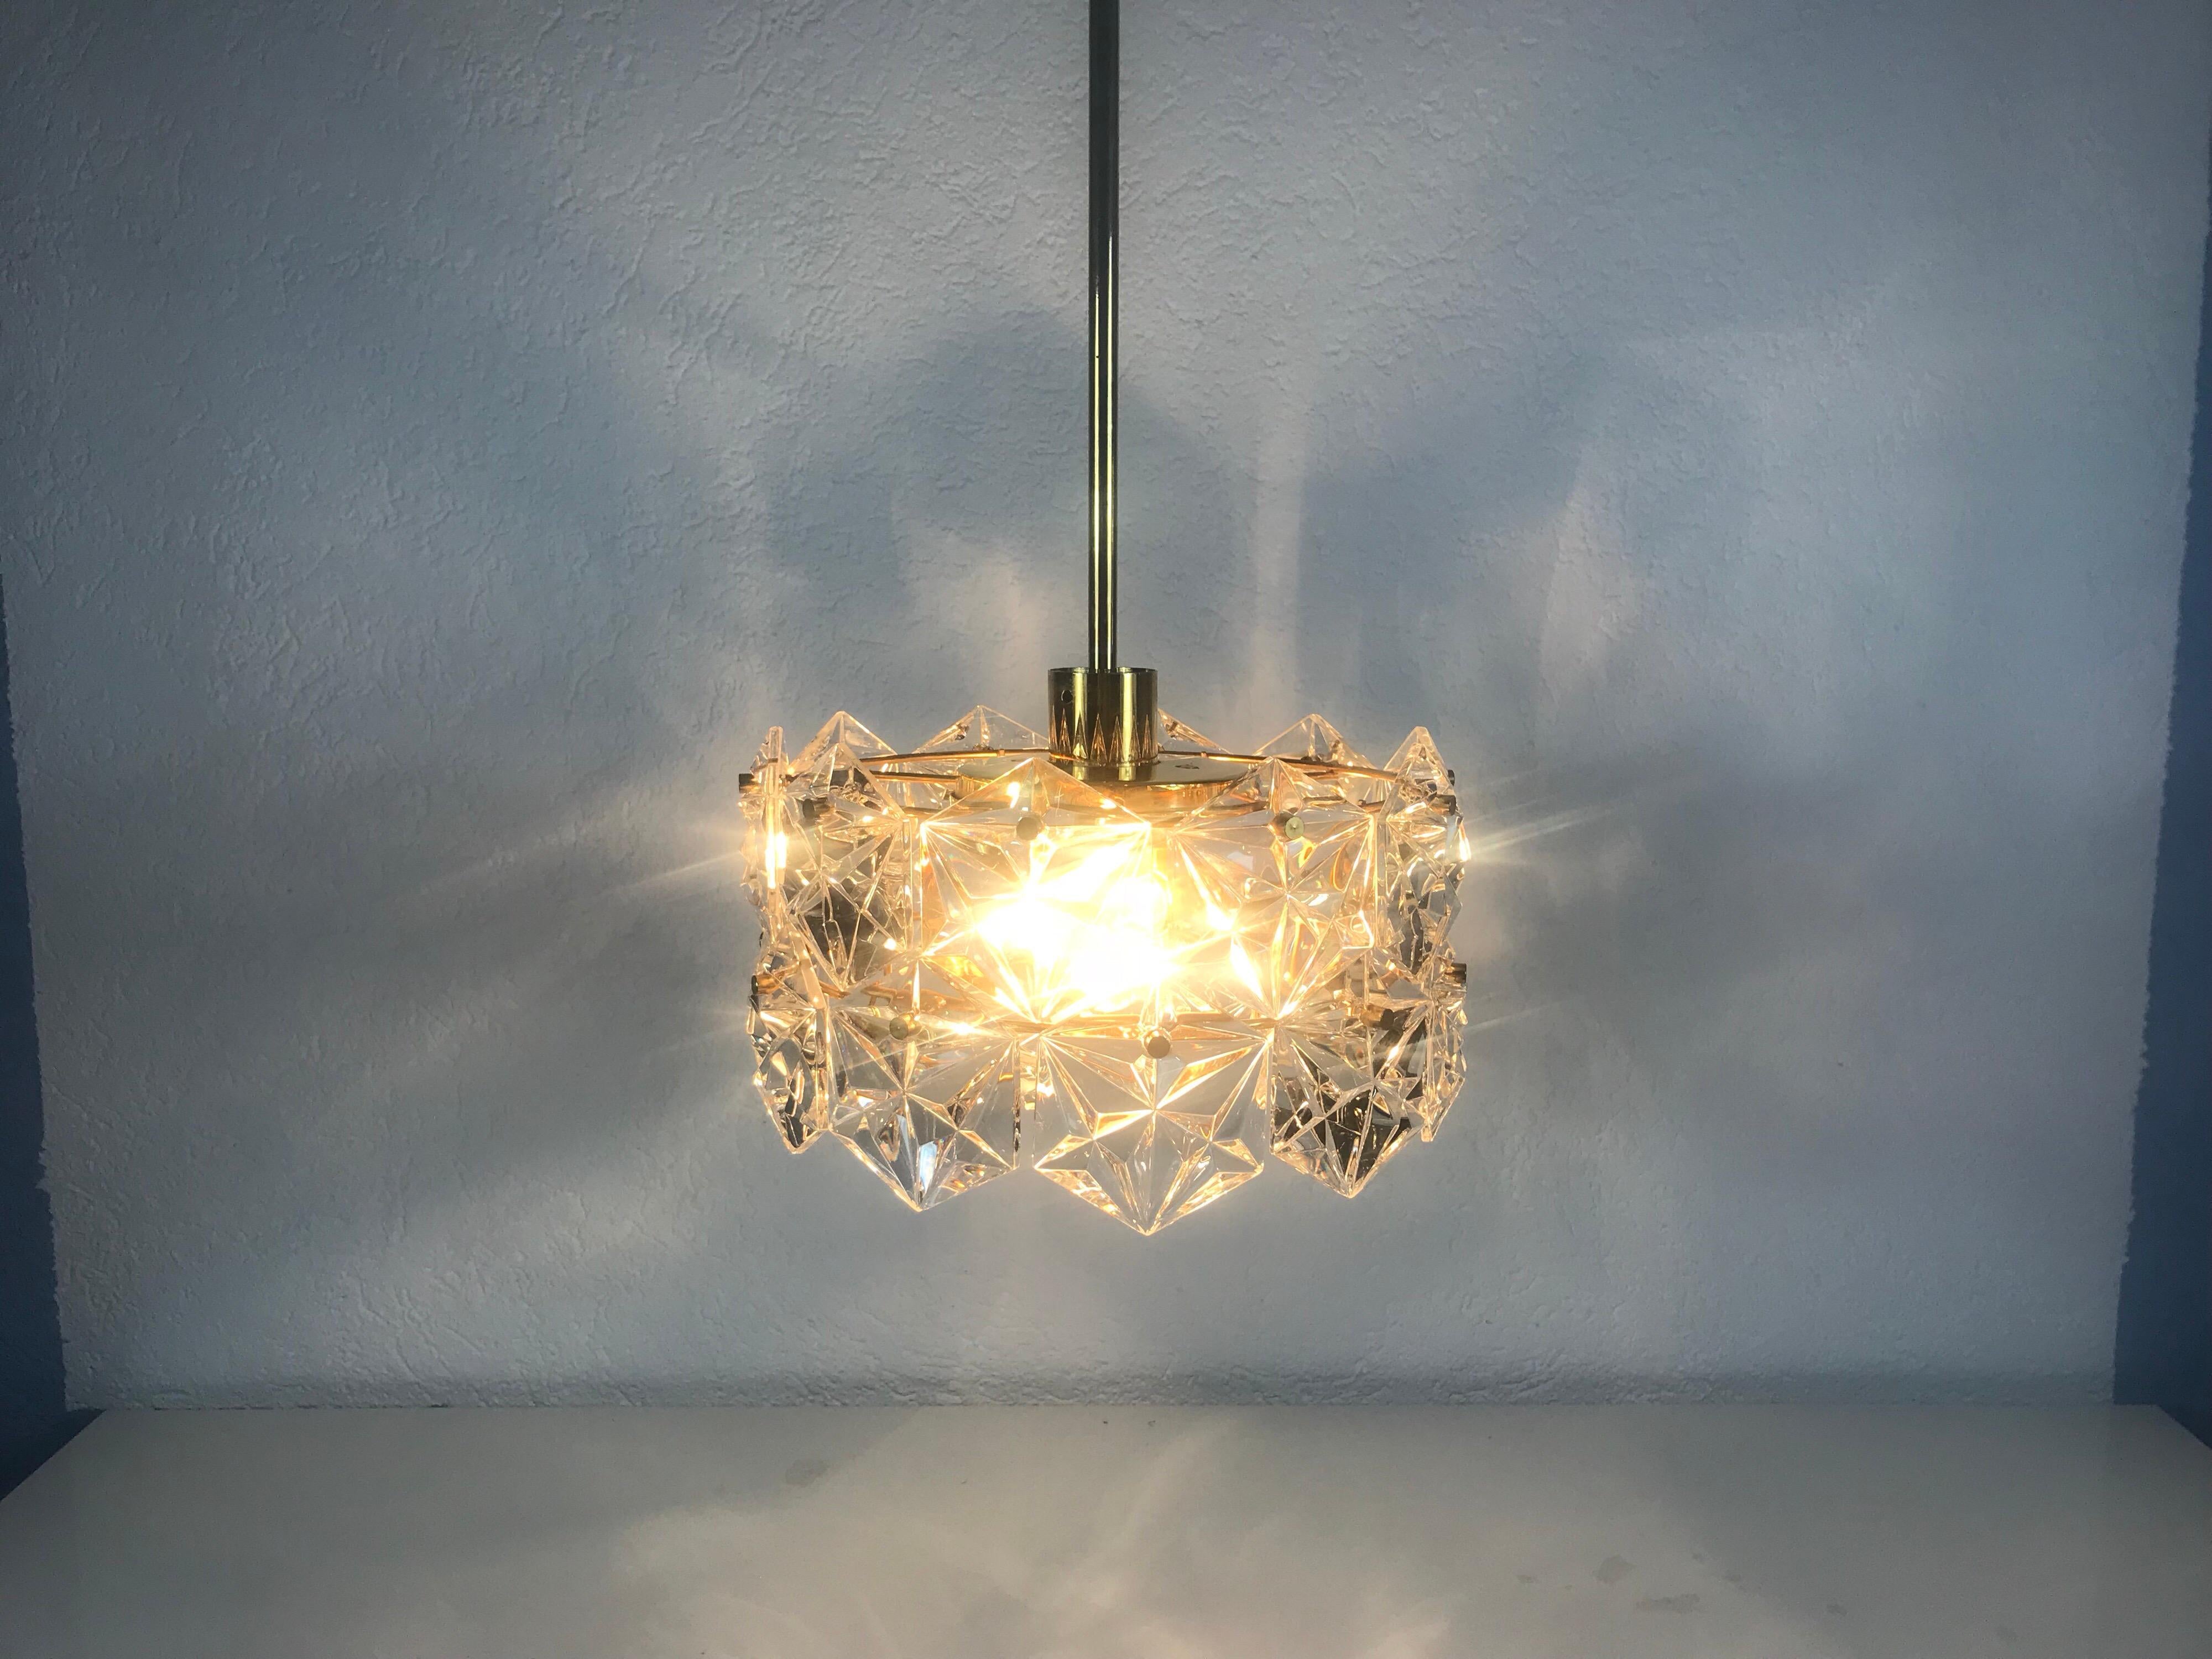 A Kinkeldey ice glass chandelier made in Germany in the 1960s. It is fascinating with its beautiful hexagonal shape of the crystal glass. All metal parts of this light are gold plated and in a very high quality standard. The crystals are all hand